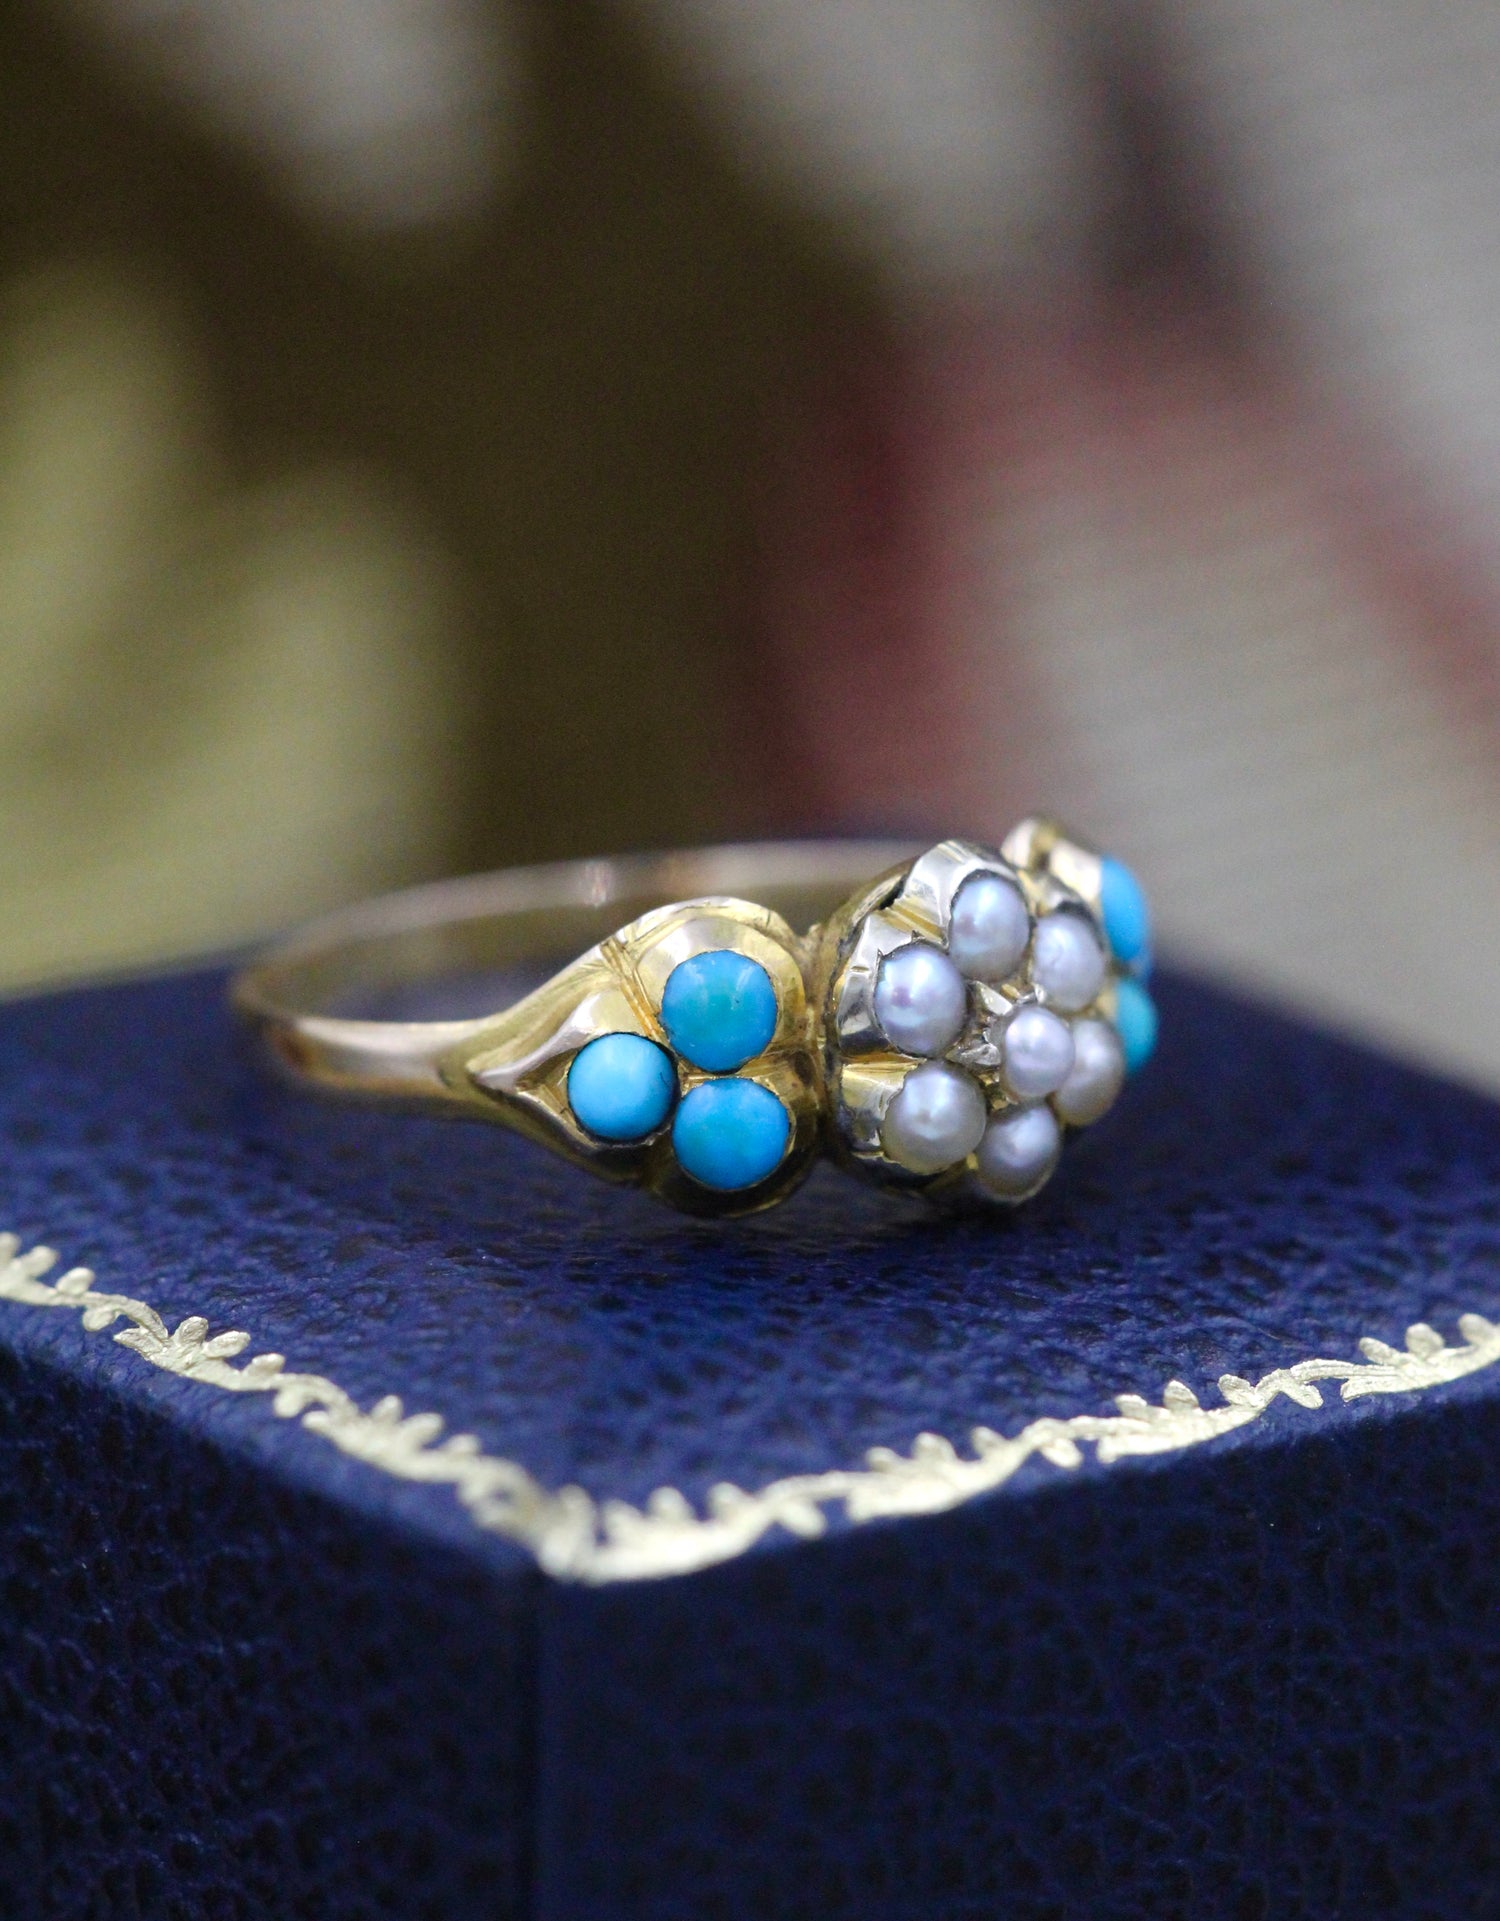 A very fine 15 carat (tested) Yellow Gold Turquoise and Pearl Ring. Circa 1860 - Robin Haydock Antiques